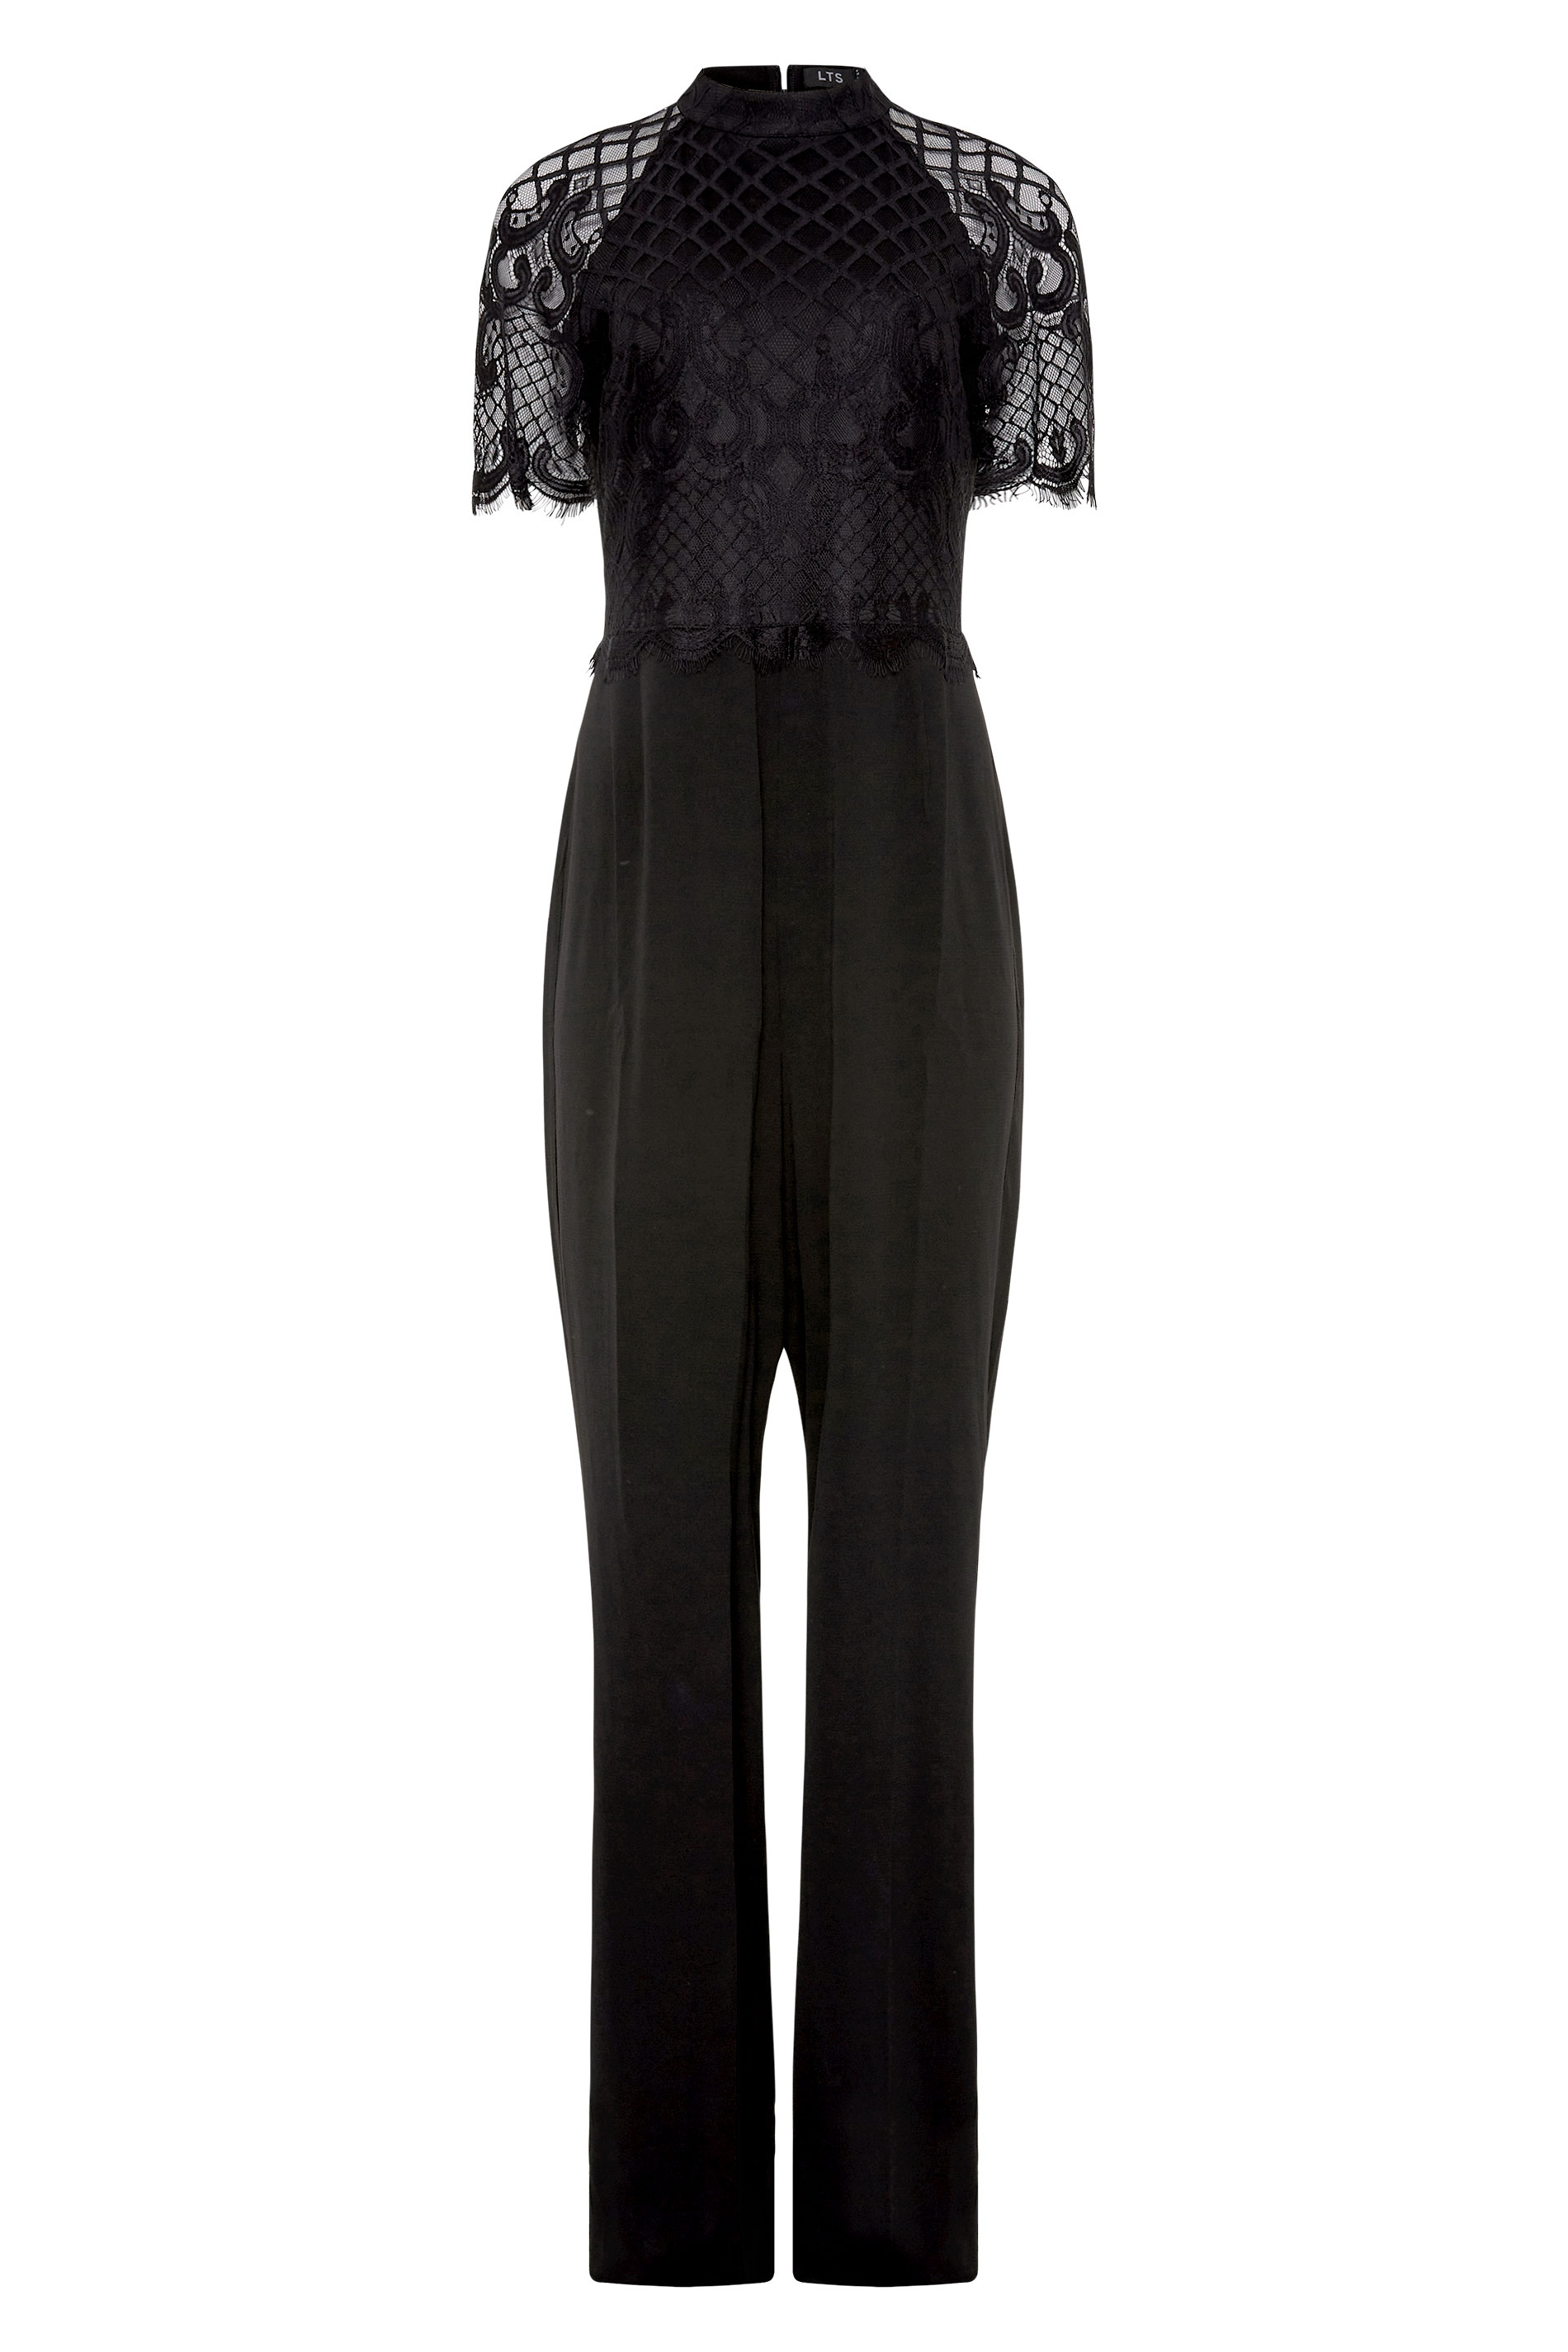 LTS Black Lace Sleeve Jumpsuit | Long Tall Sally